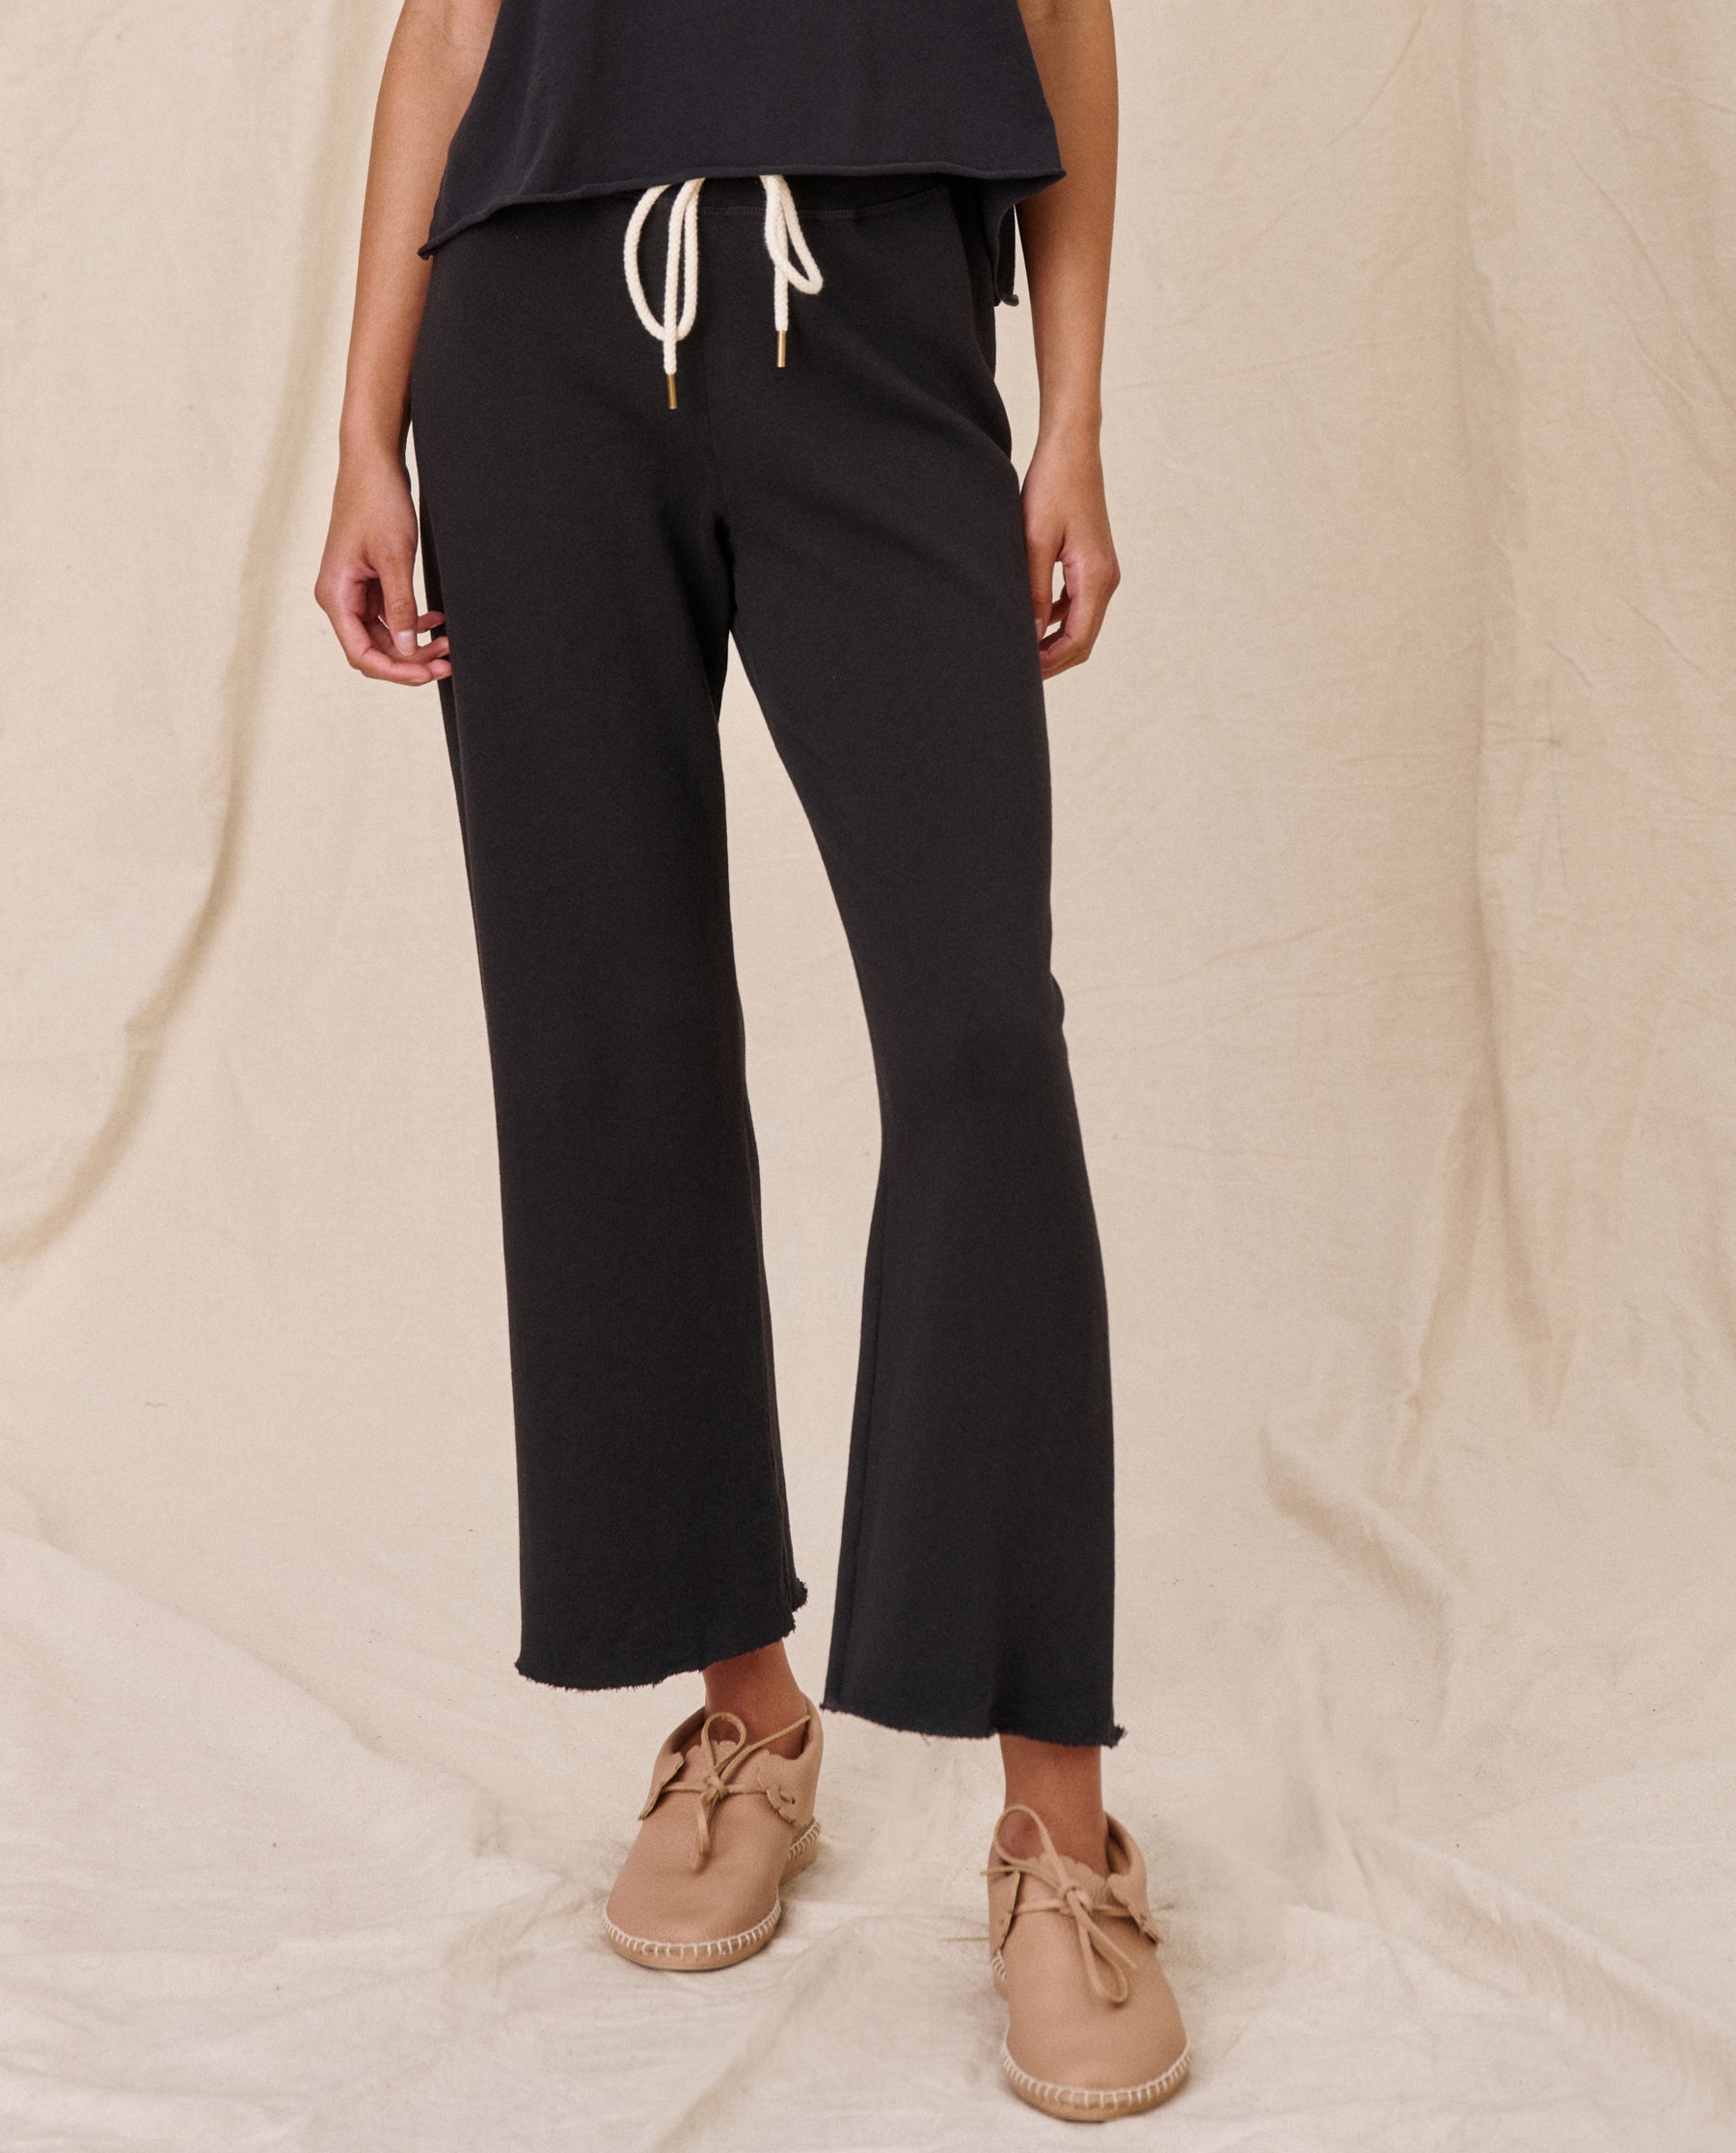 The Wide Leg Cropped Sweatpant. -- Almost Black SWEATPANTS THE GREAT. CORE KNITS